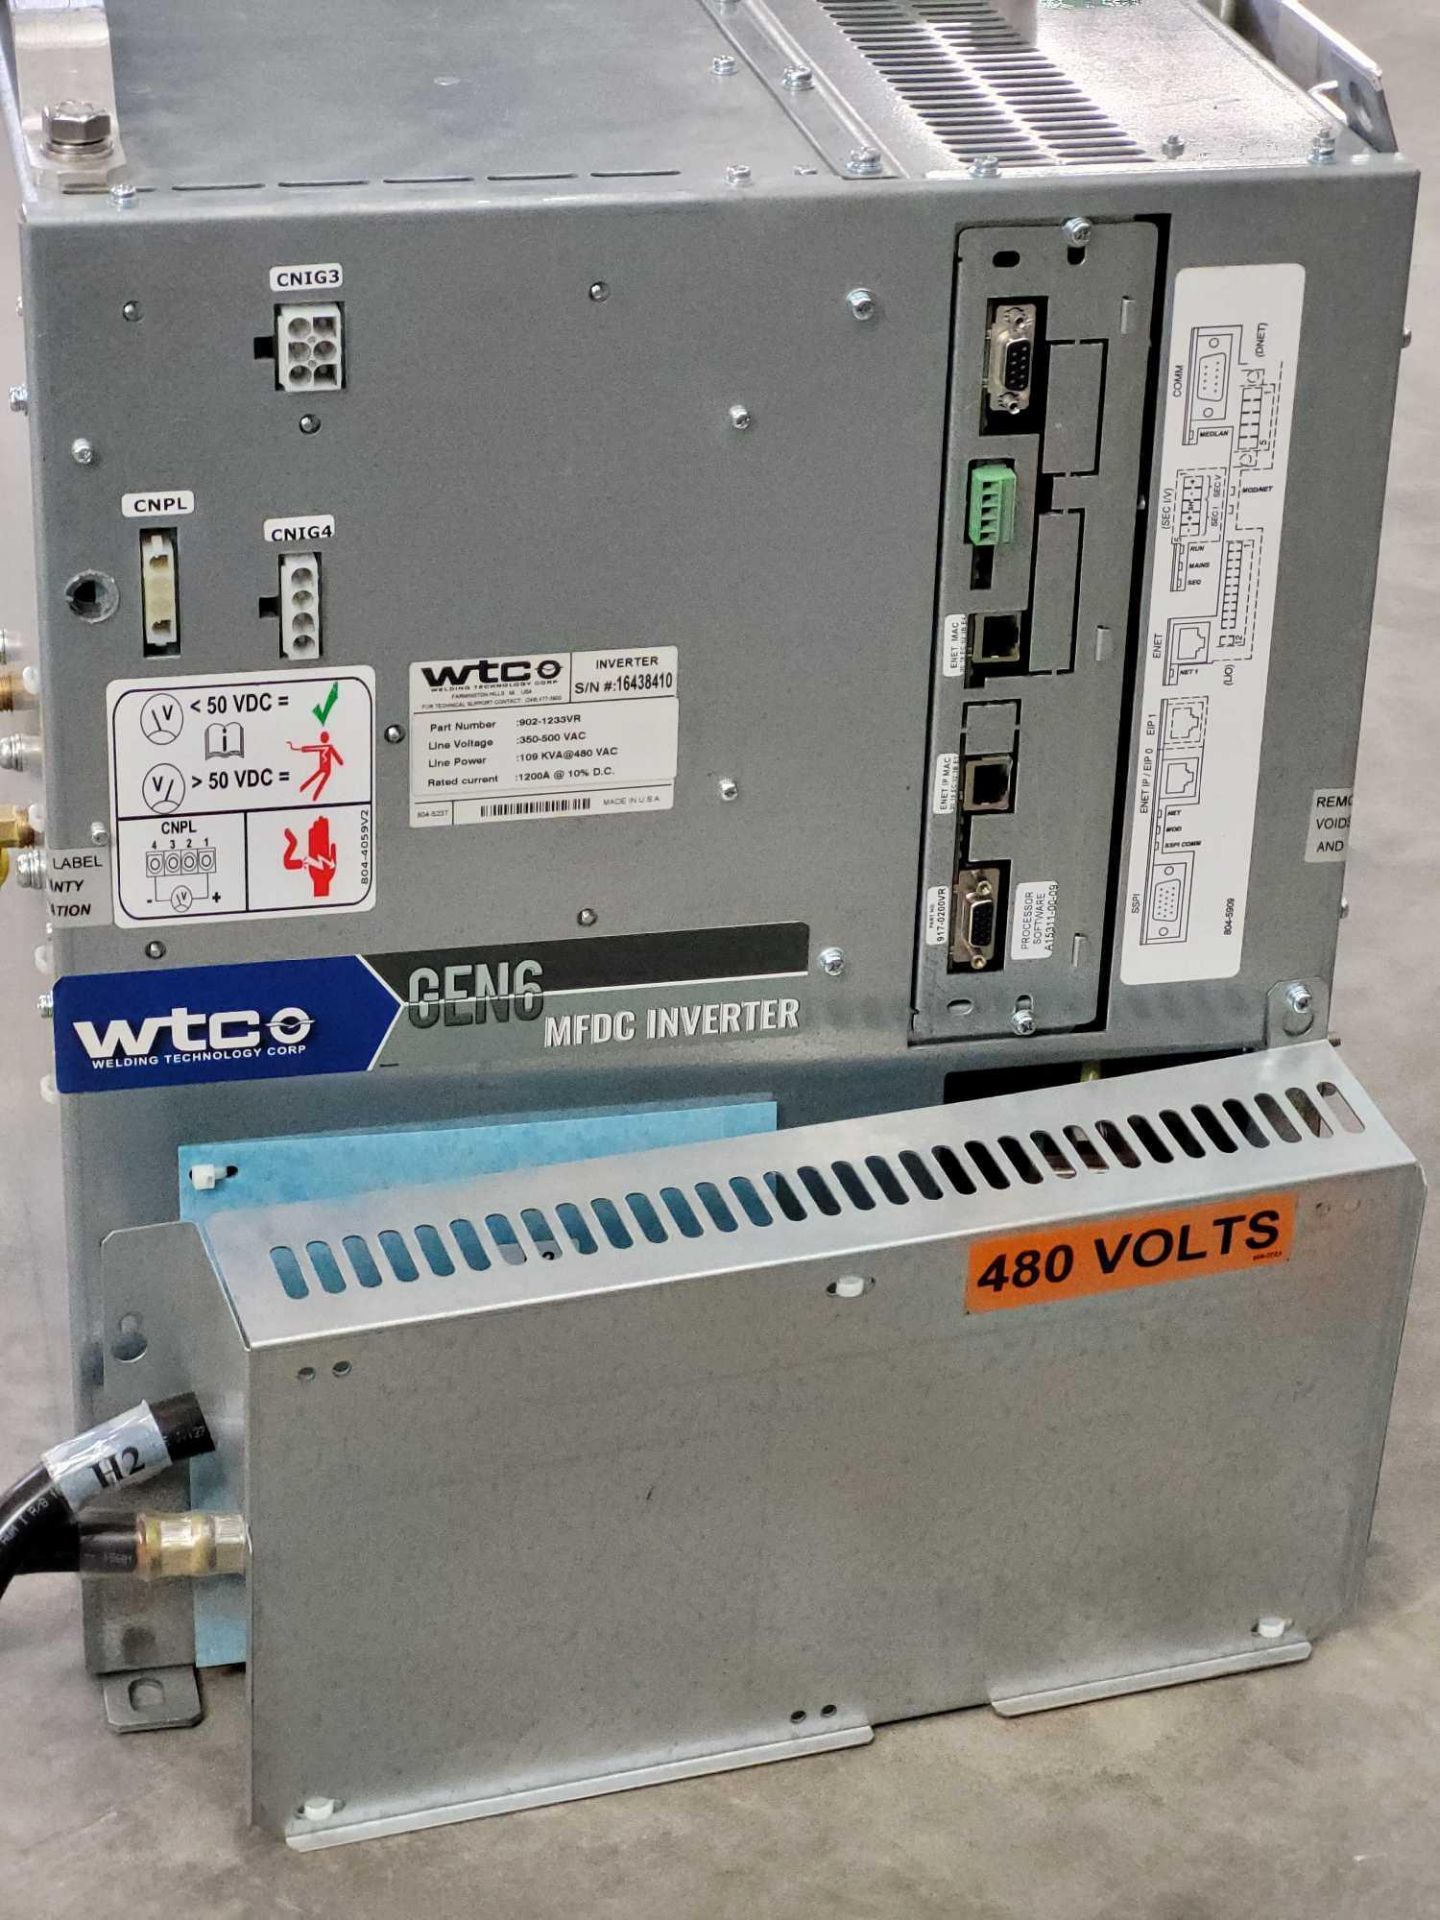 WTC 905-1233VR / Gen 6 MFDC Inverter  /  Lot Weight: 110 lbs - Image 2 of 8